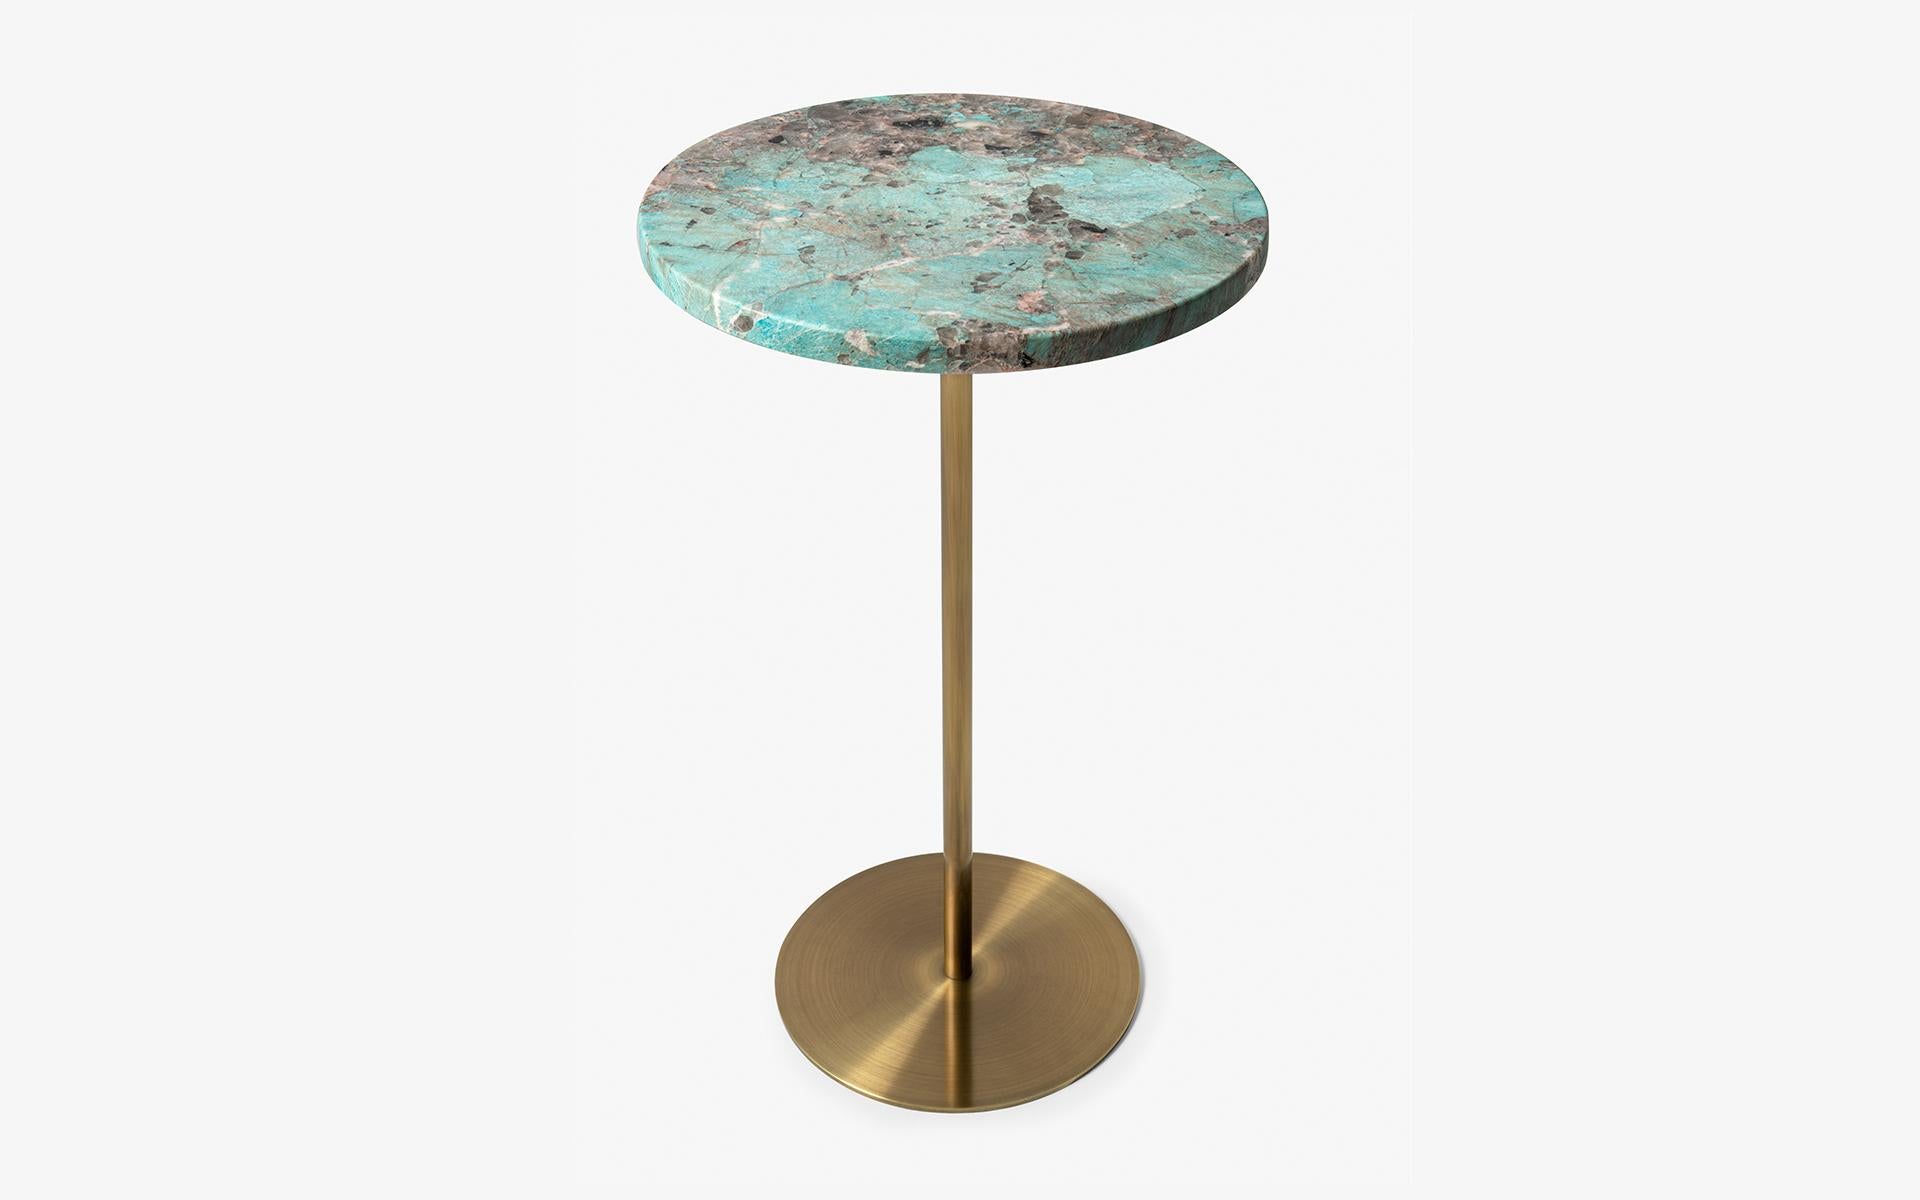 Metalwork Basic Brass Plated Metal & Turquoise Blue Marble Side Table 'Large' For Sale